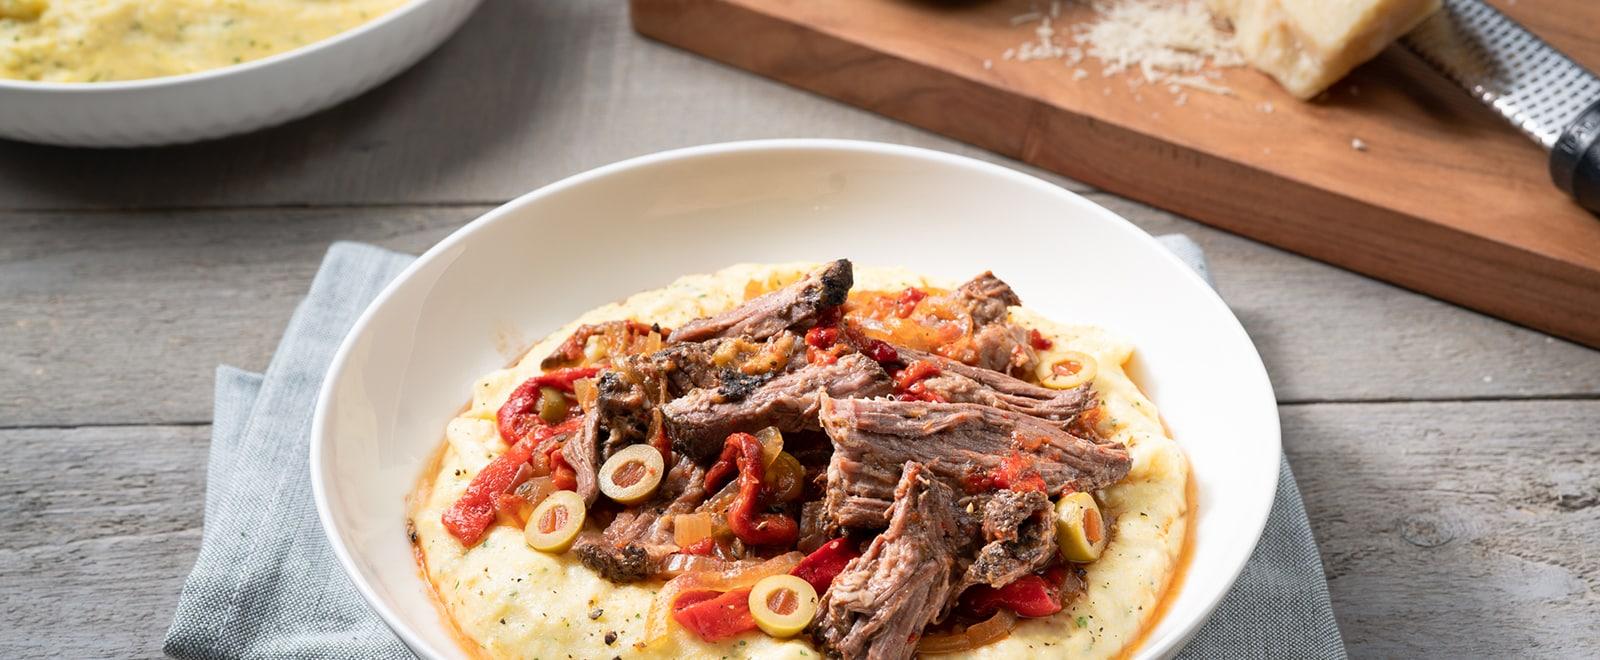 Slow Cooked Roasted Peppers and Beef with Herb Polenta